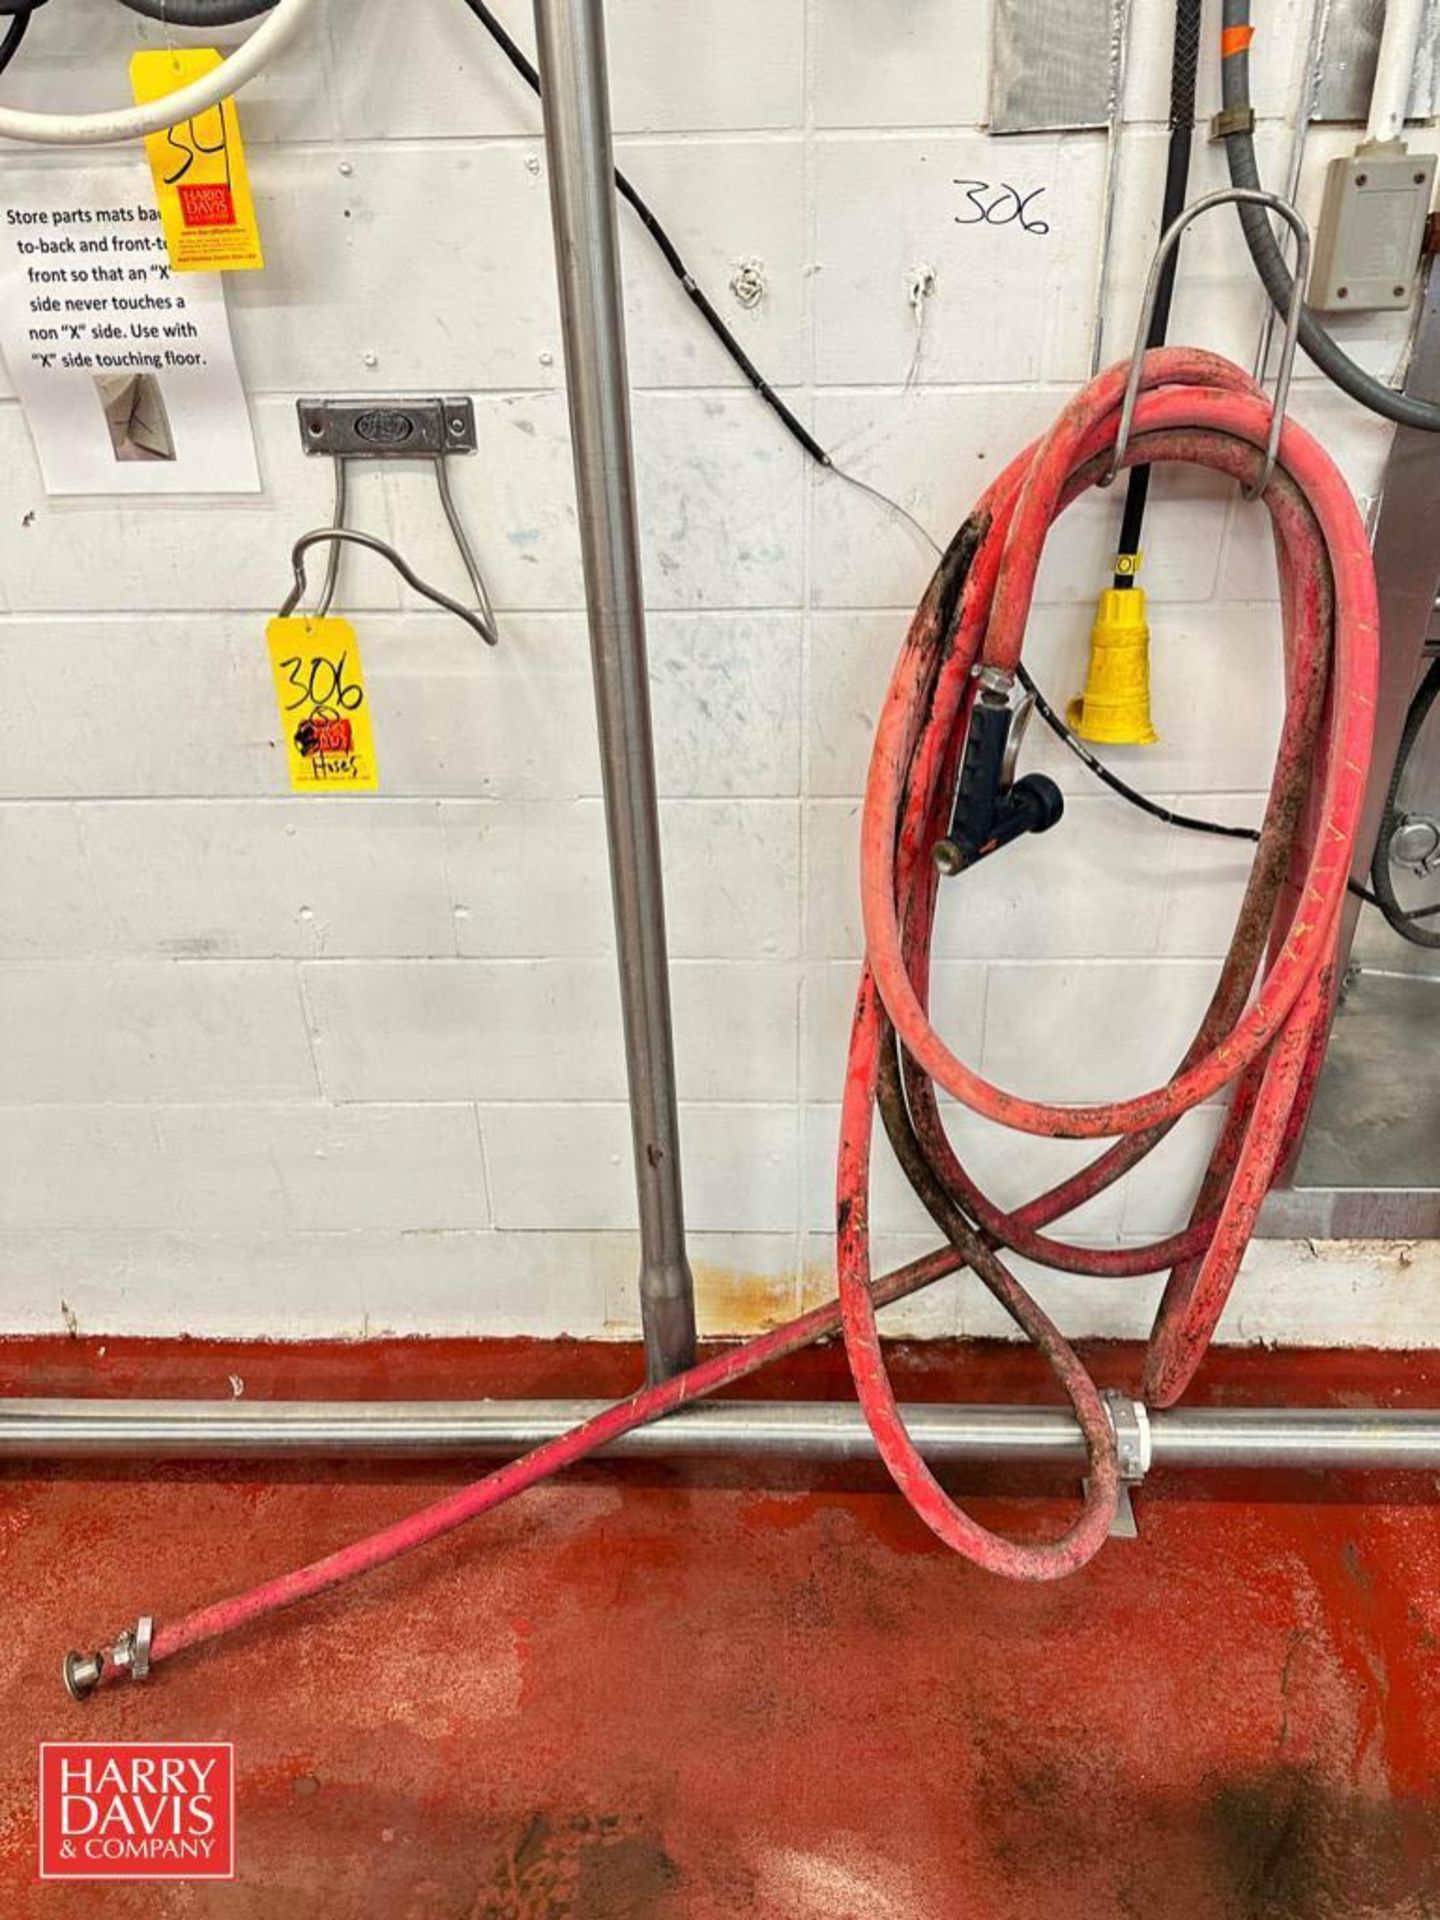 (5) S/S Hose Racks, (3) Suction/Discharge Hoses and (2) Hoses with Sprayers